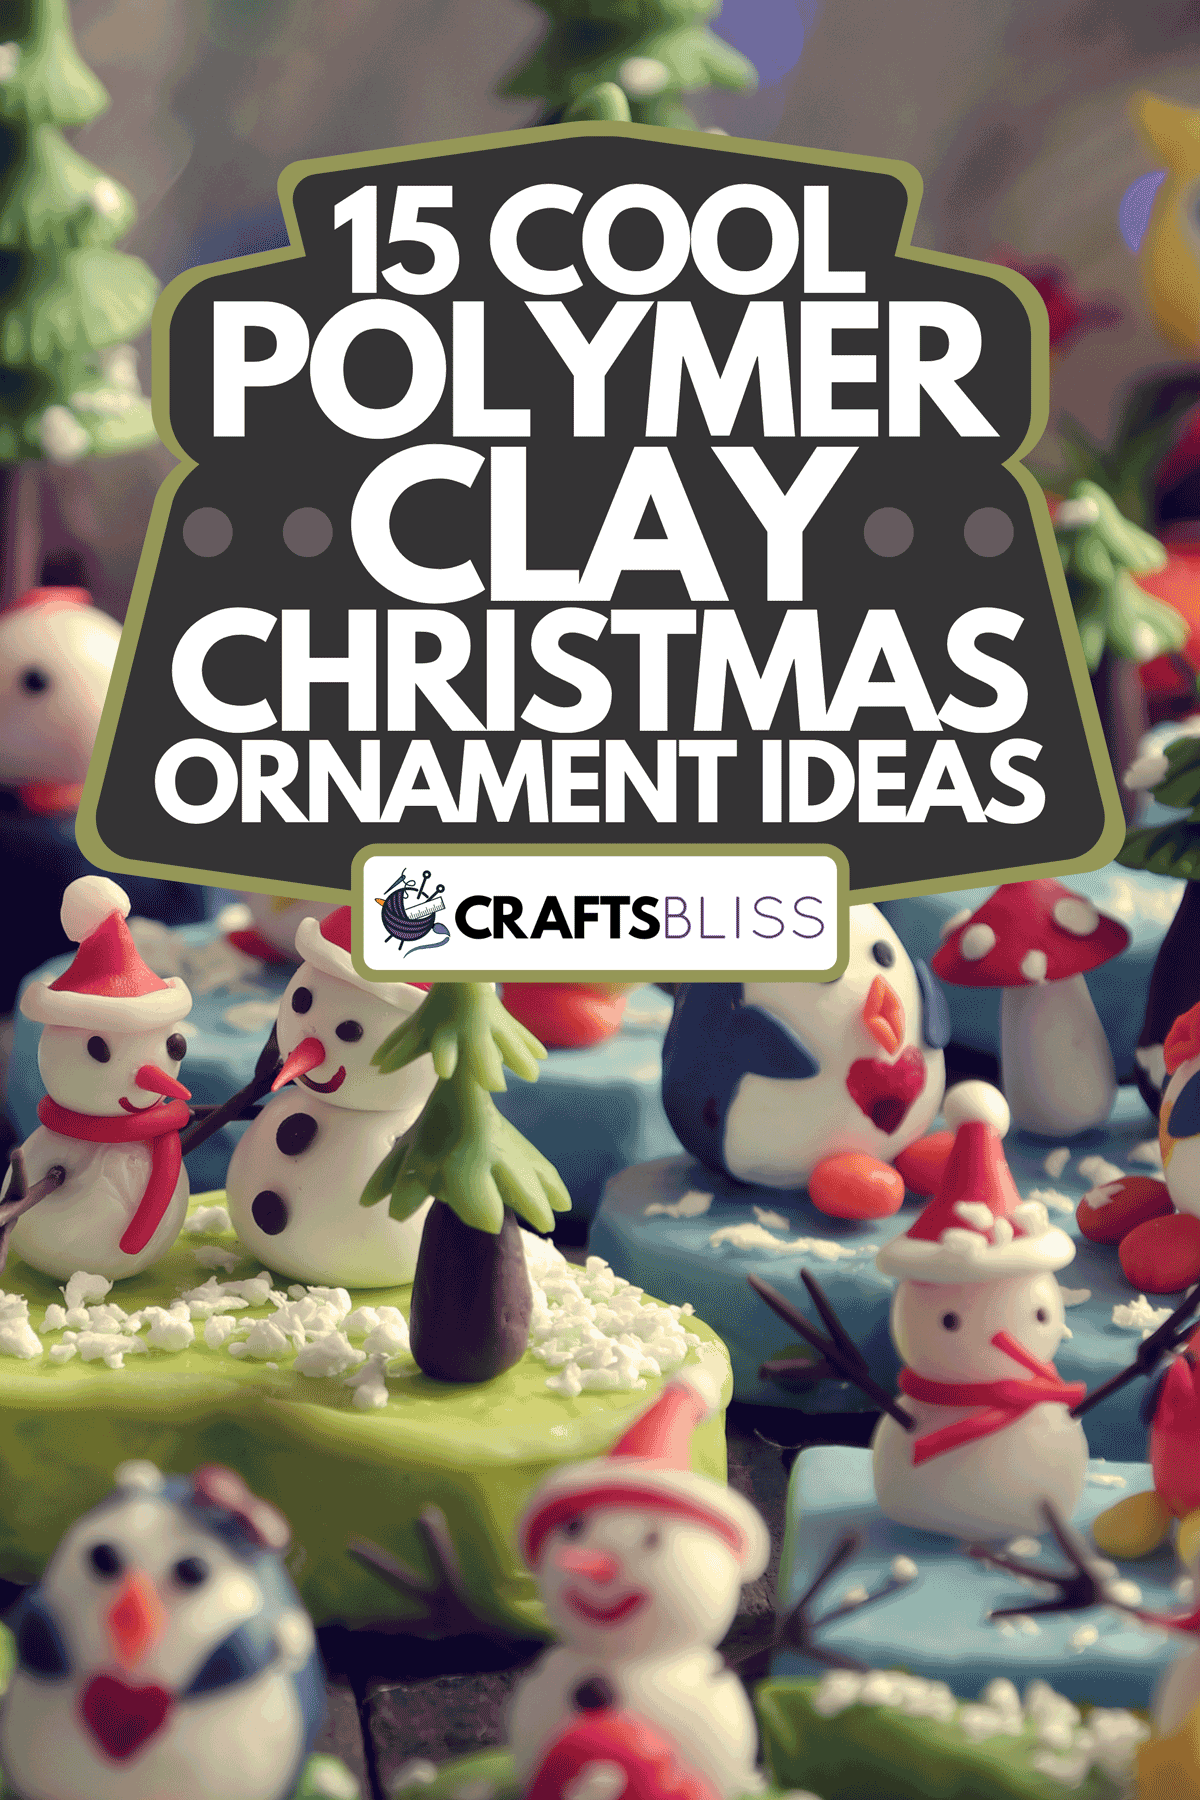 A Christmas ornament from clay, 15 Cool Polymer Clay Christmas Ornament Ideas